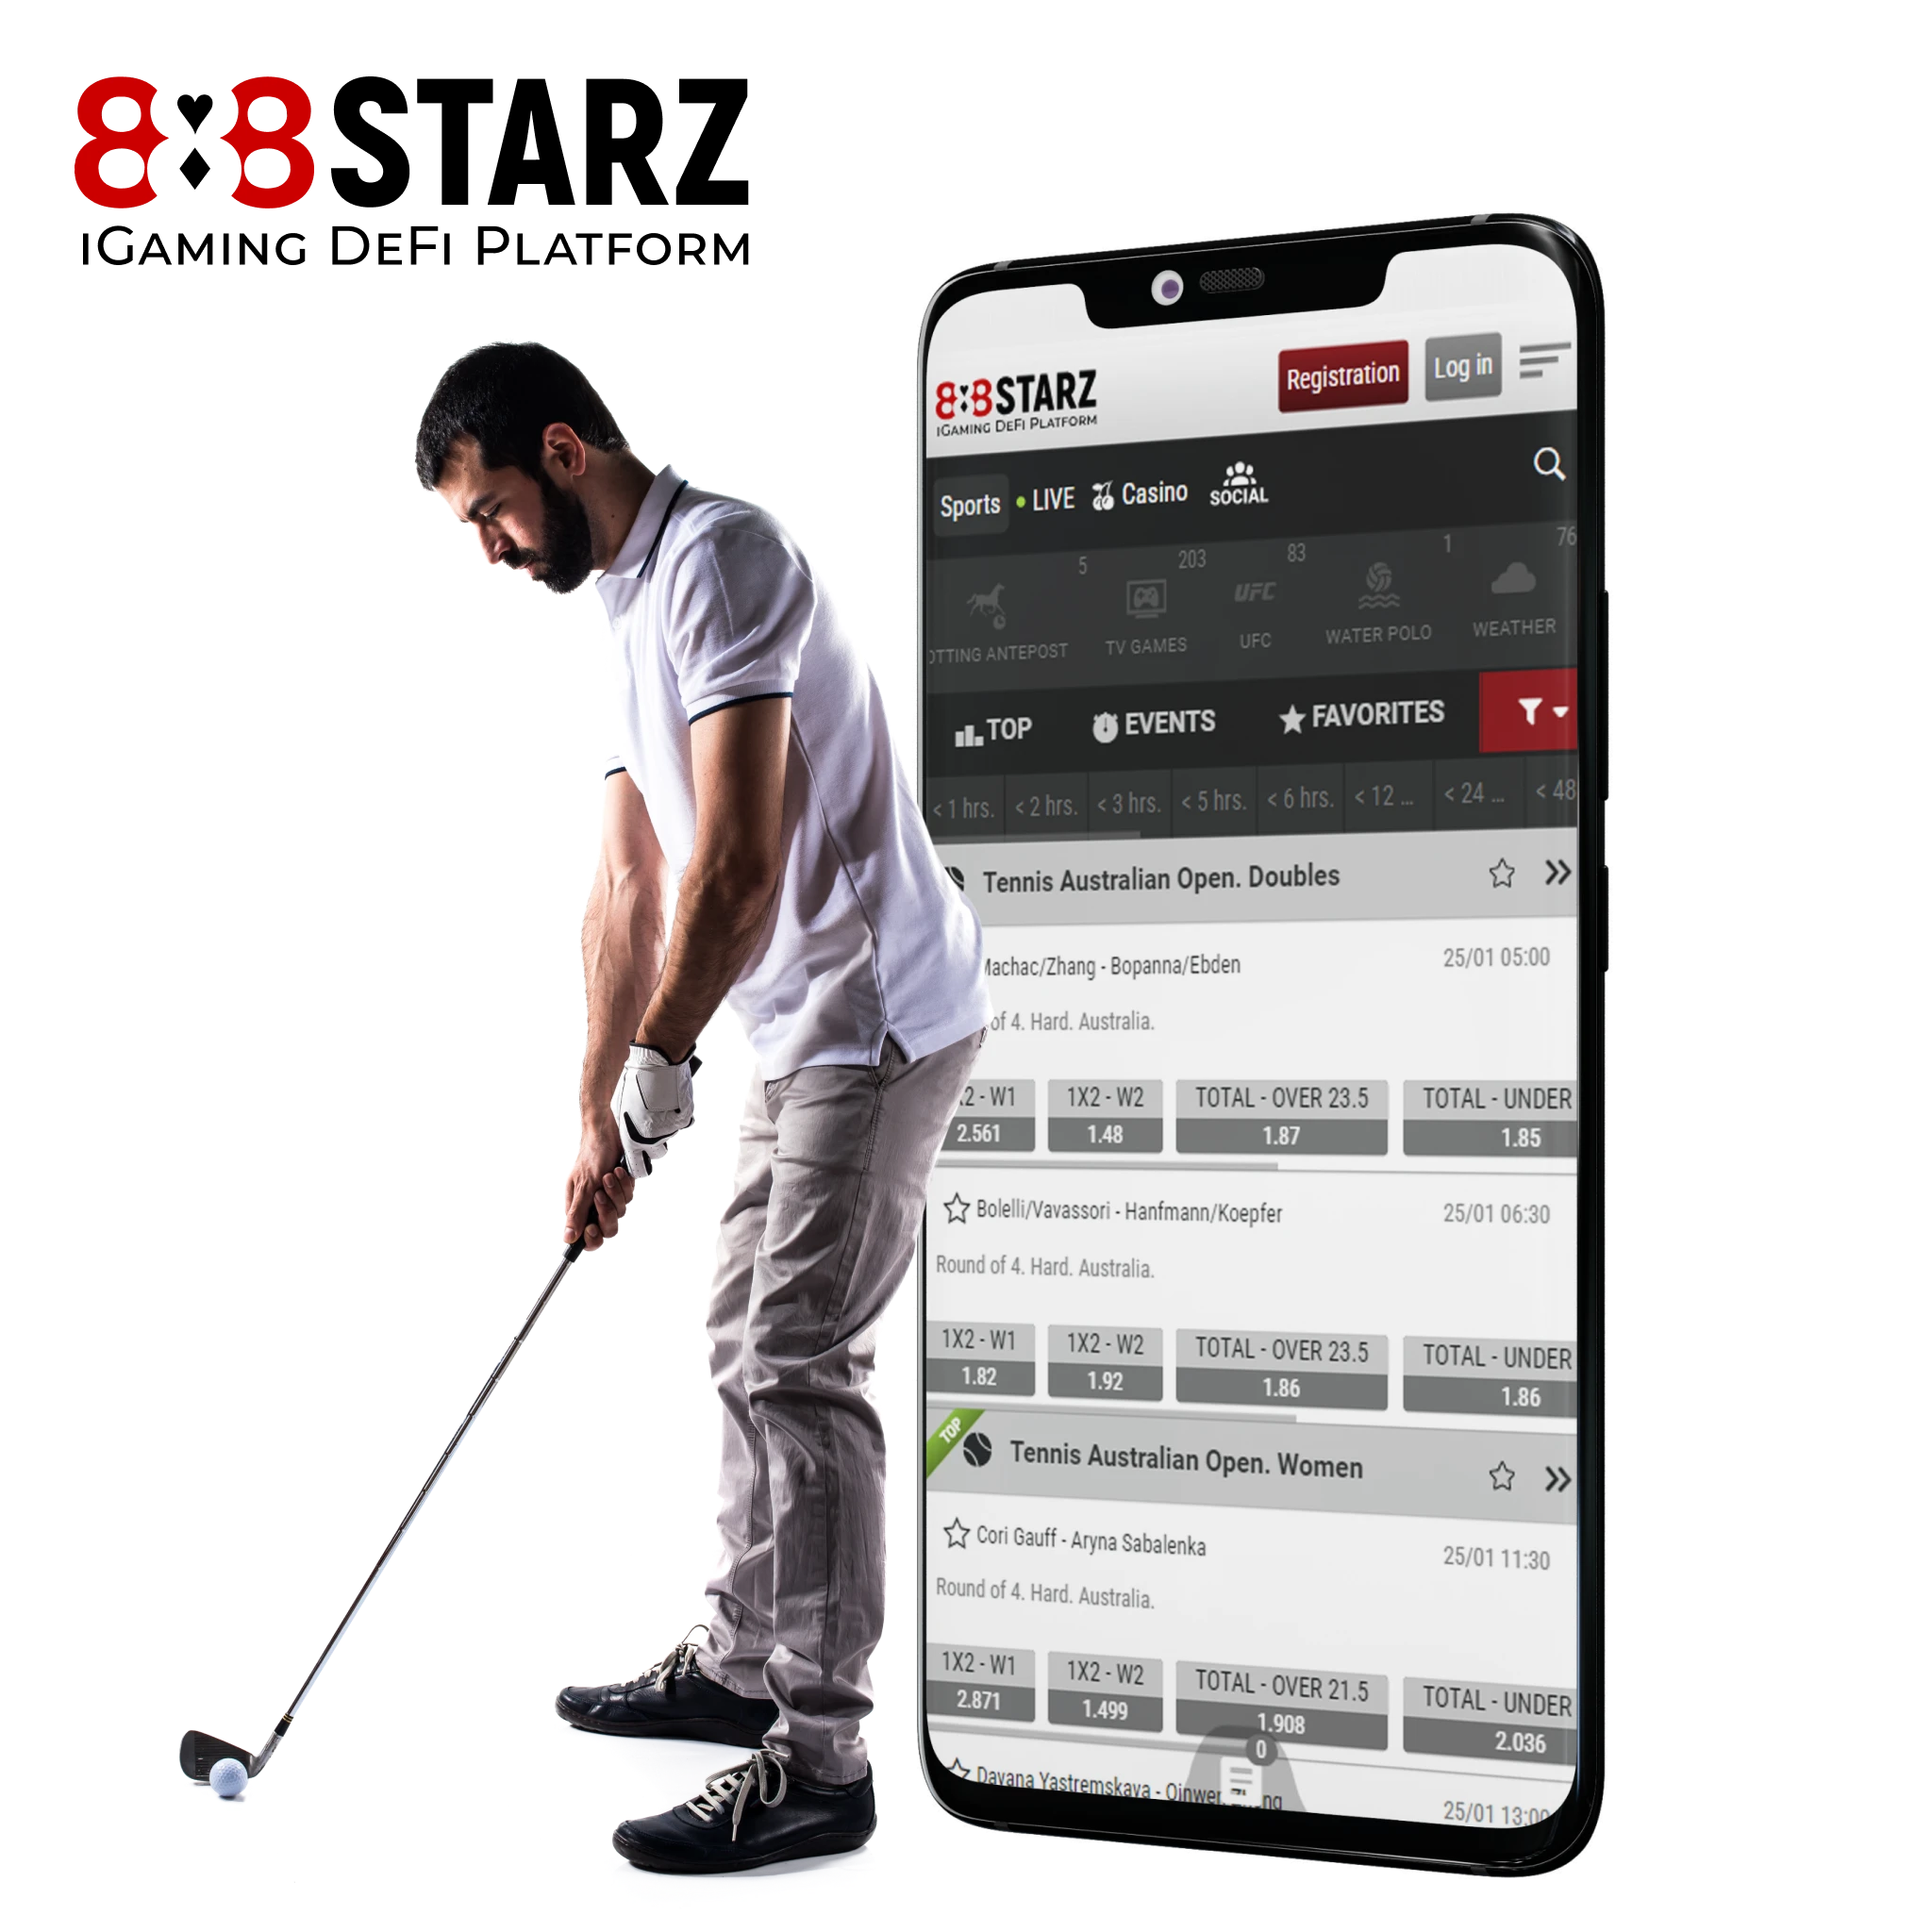 You can download and install the 888starz app on Android and iOS for golf betting.